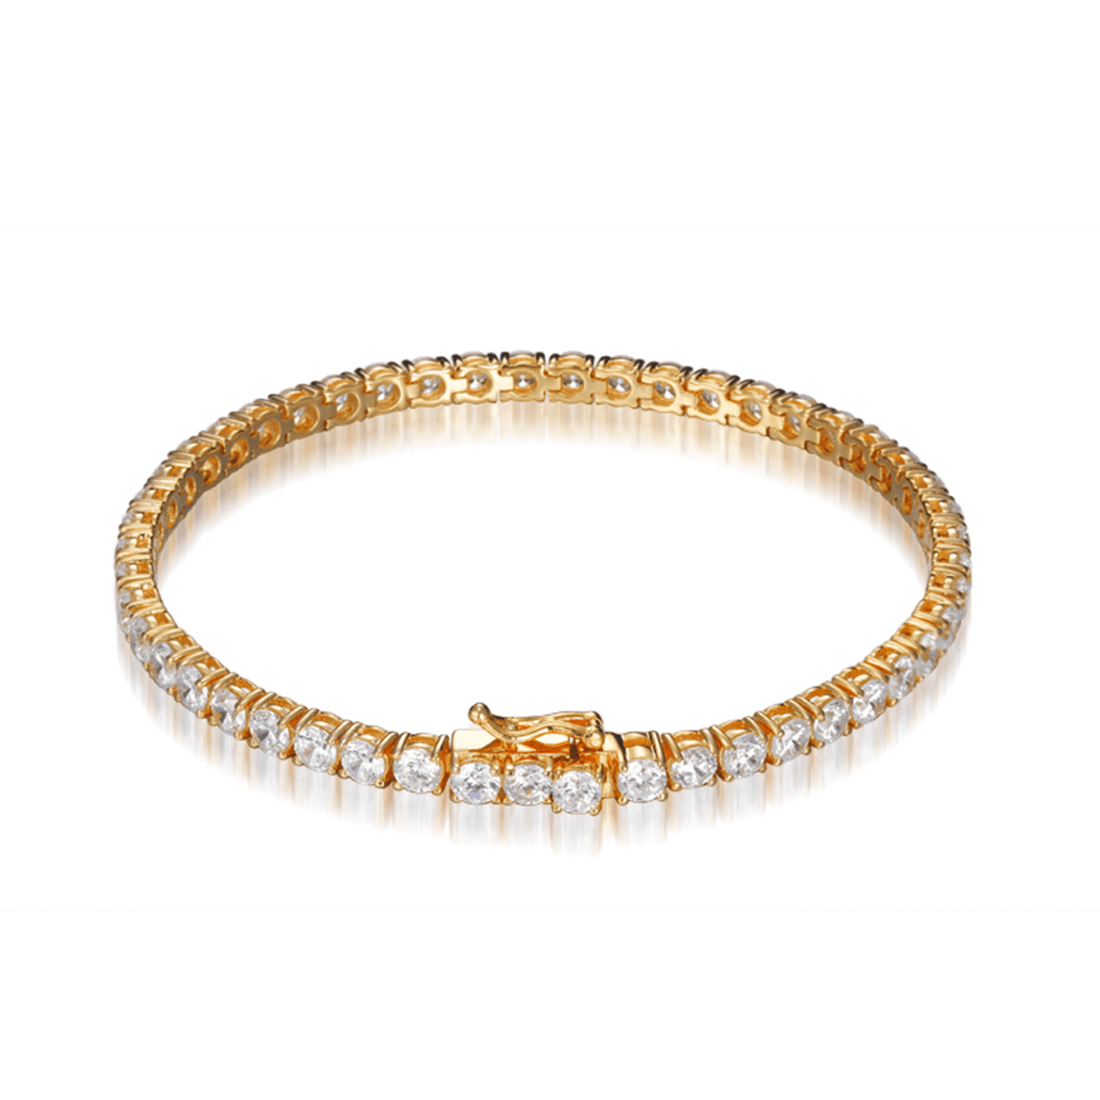 15.70ct Cubic Zirconia Classic Tennis Bracelet in 14k Yellow Gold Plated Silver